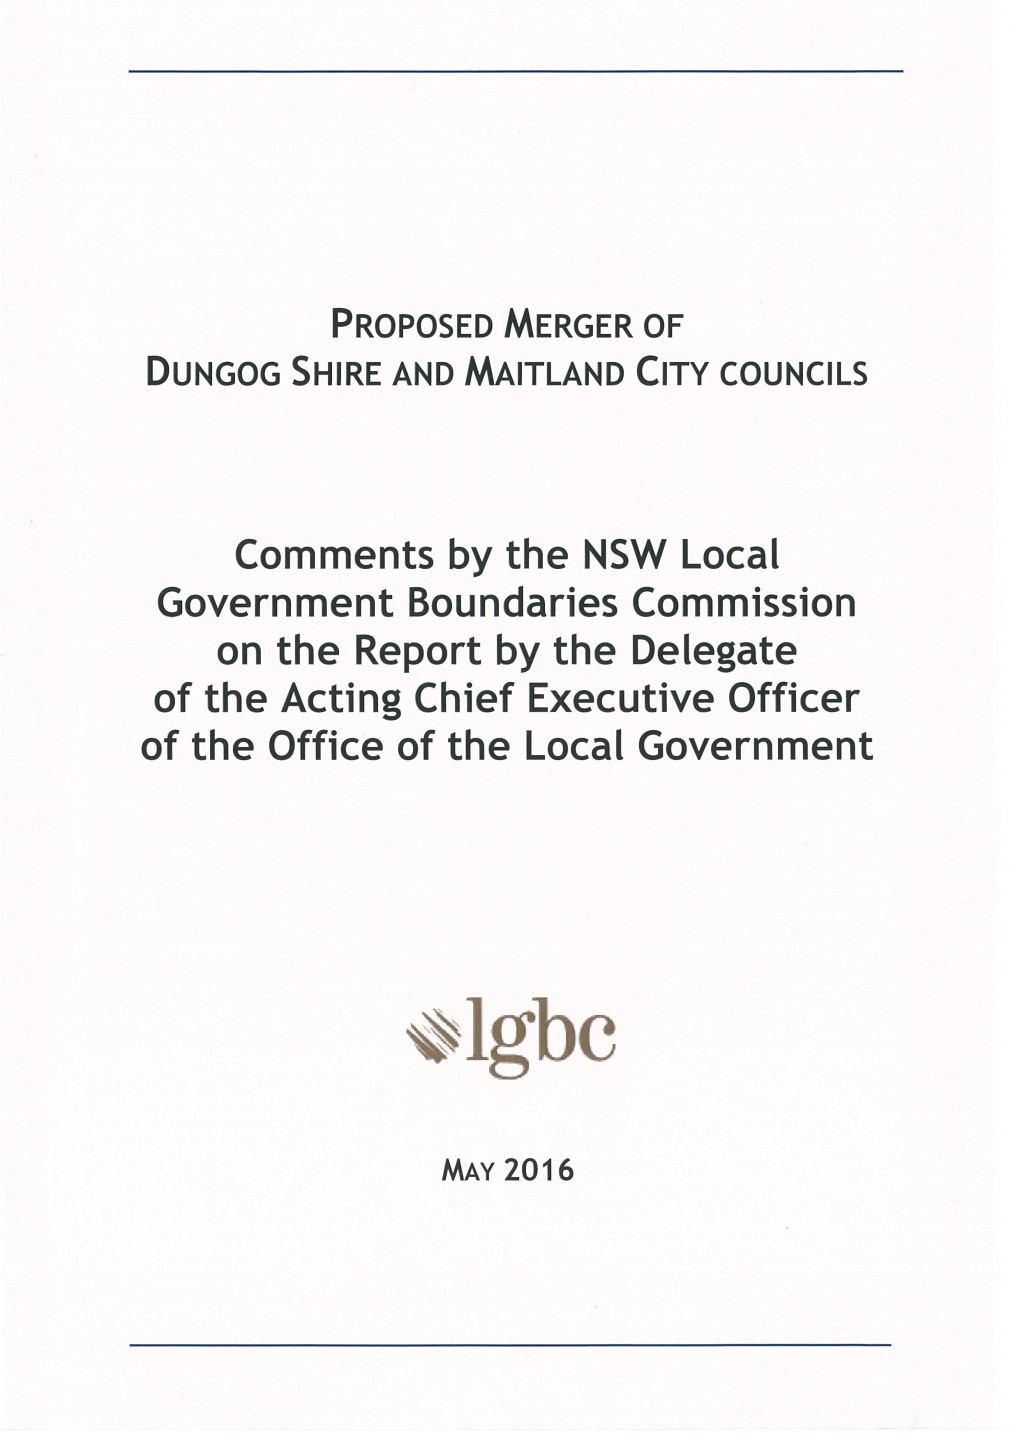 Dungog and Maitland to the Acting Chief Executive of the Office of Local Government for Examination and Report Under the Act